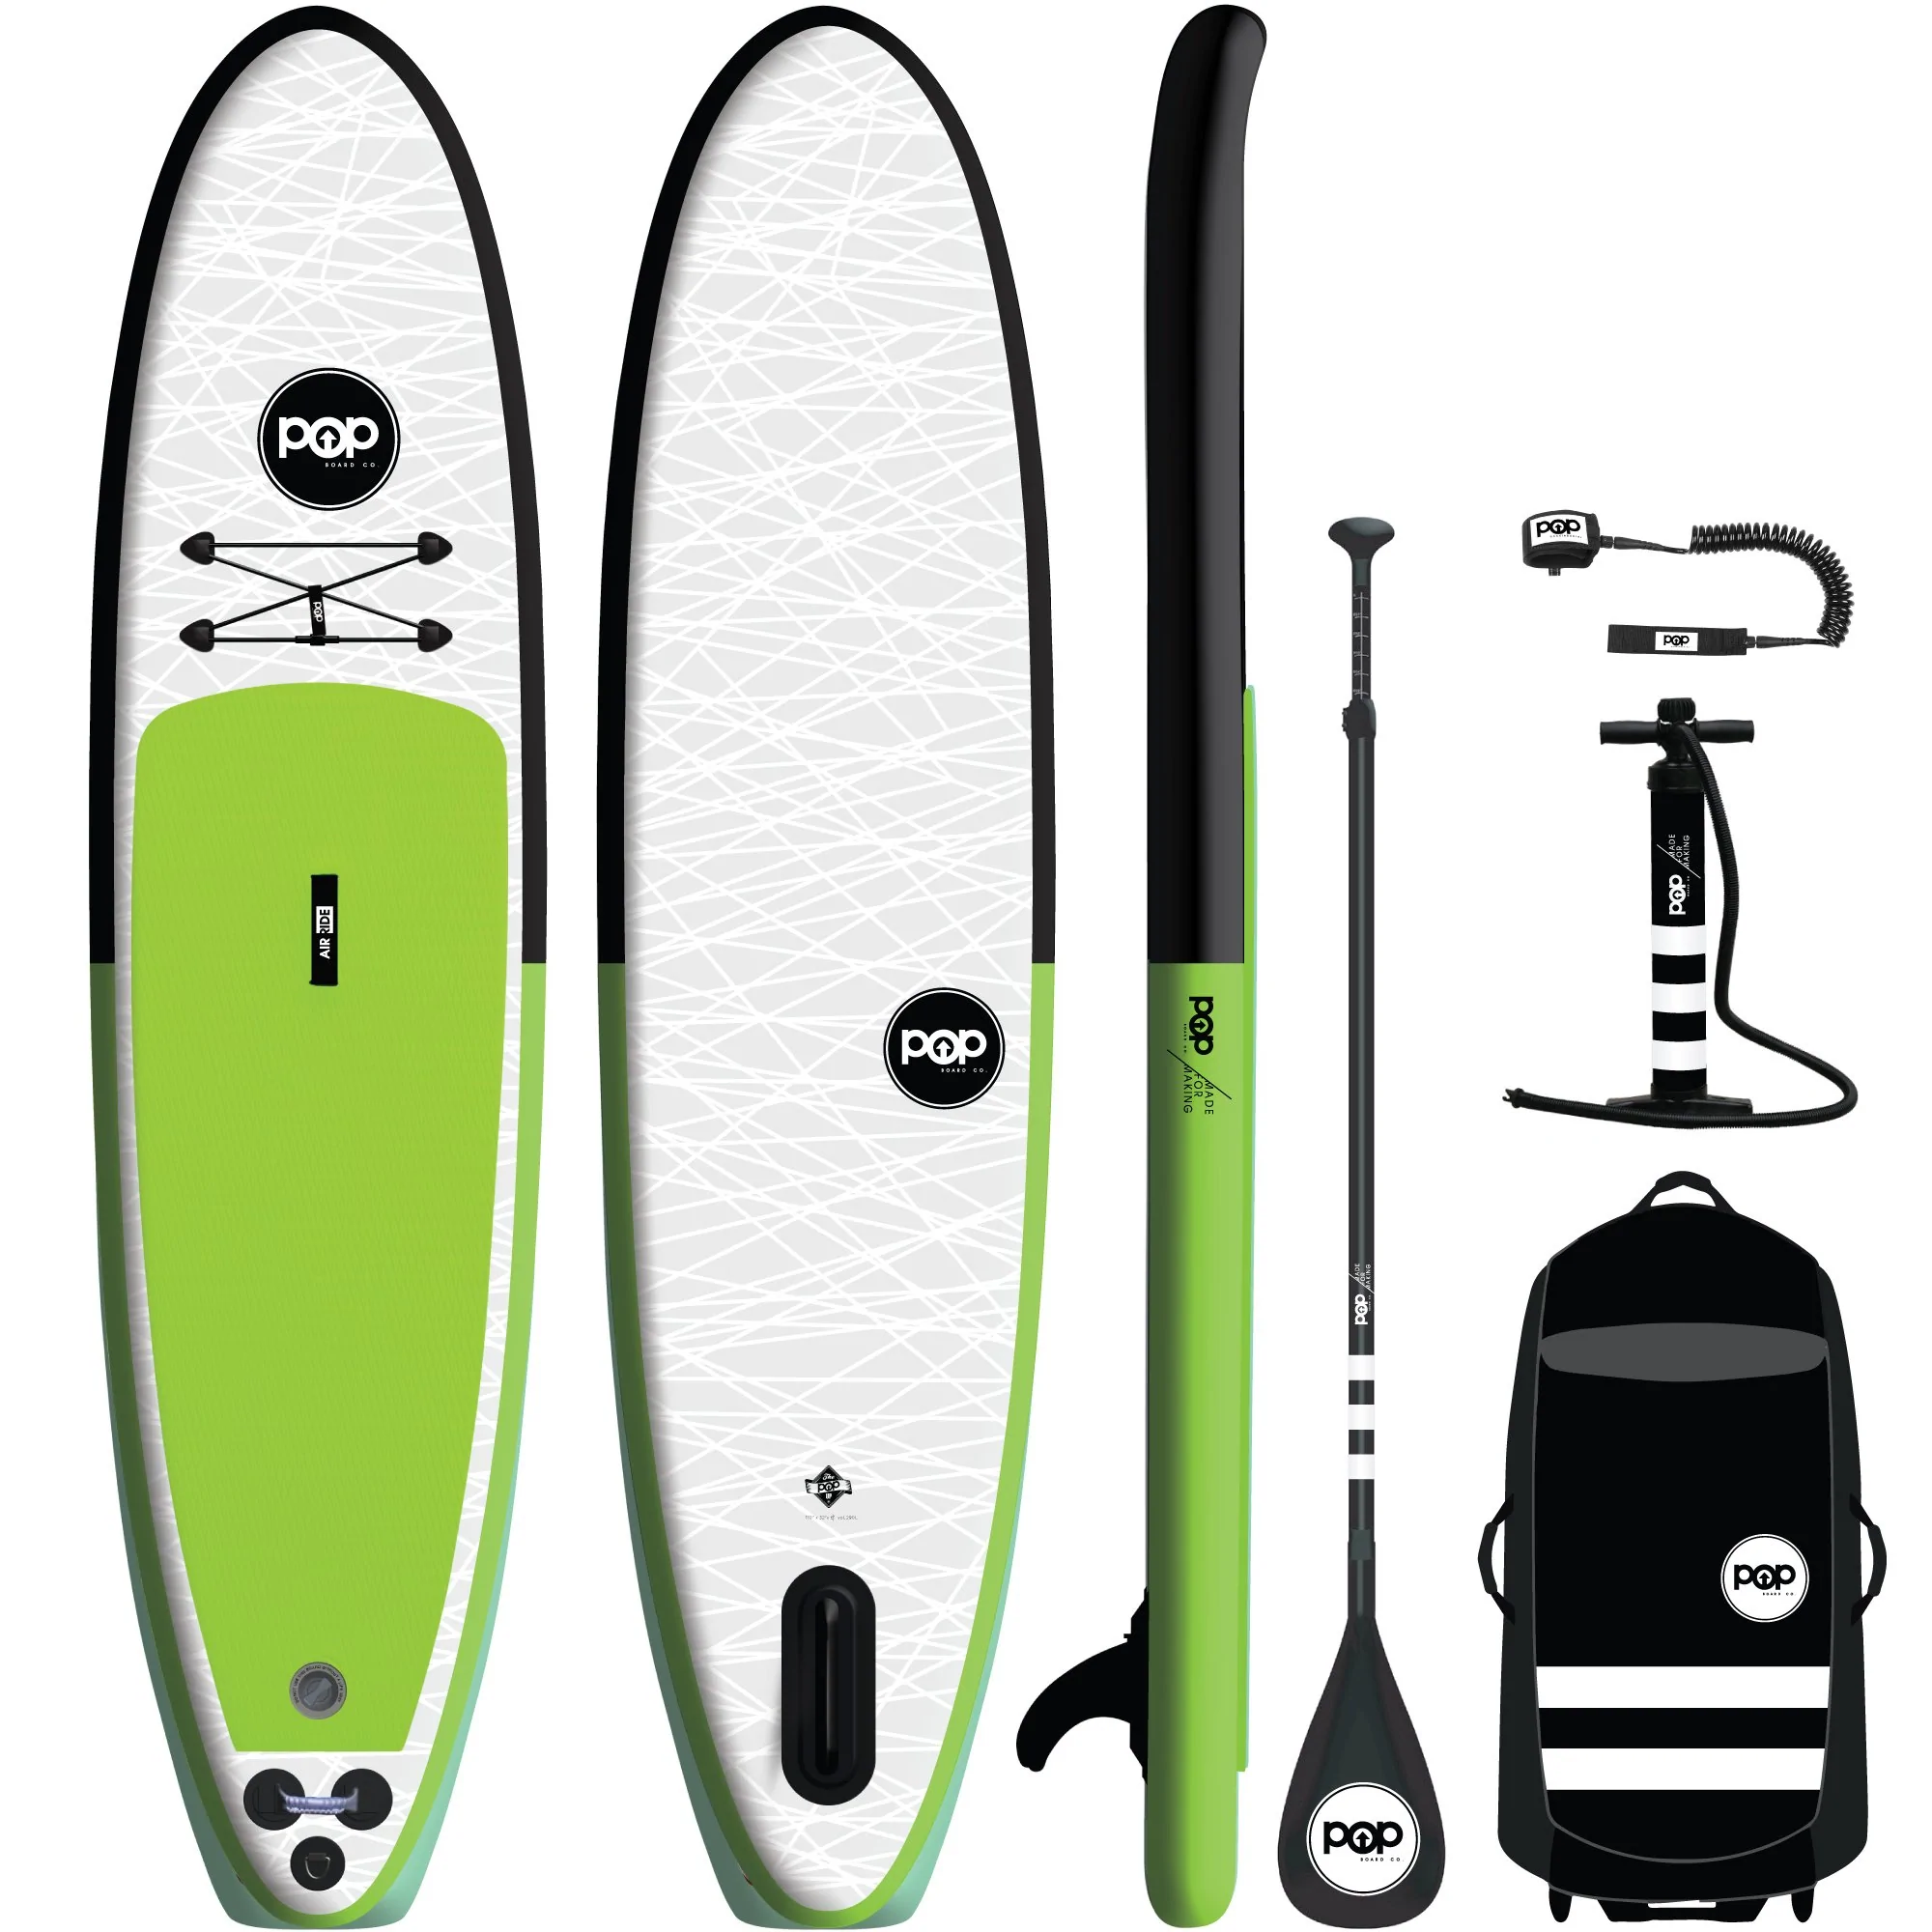 Paddleboards 11'0 Pop Up Inflatable SUP with Green and black colors.